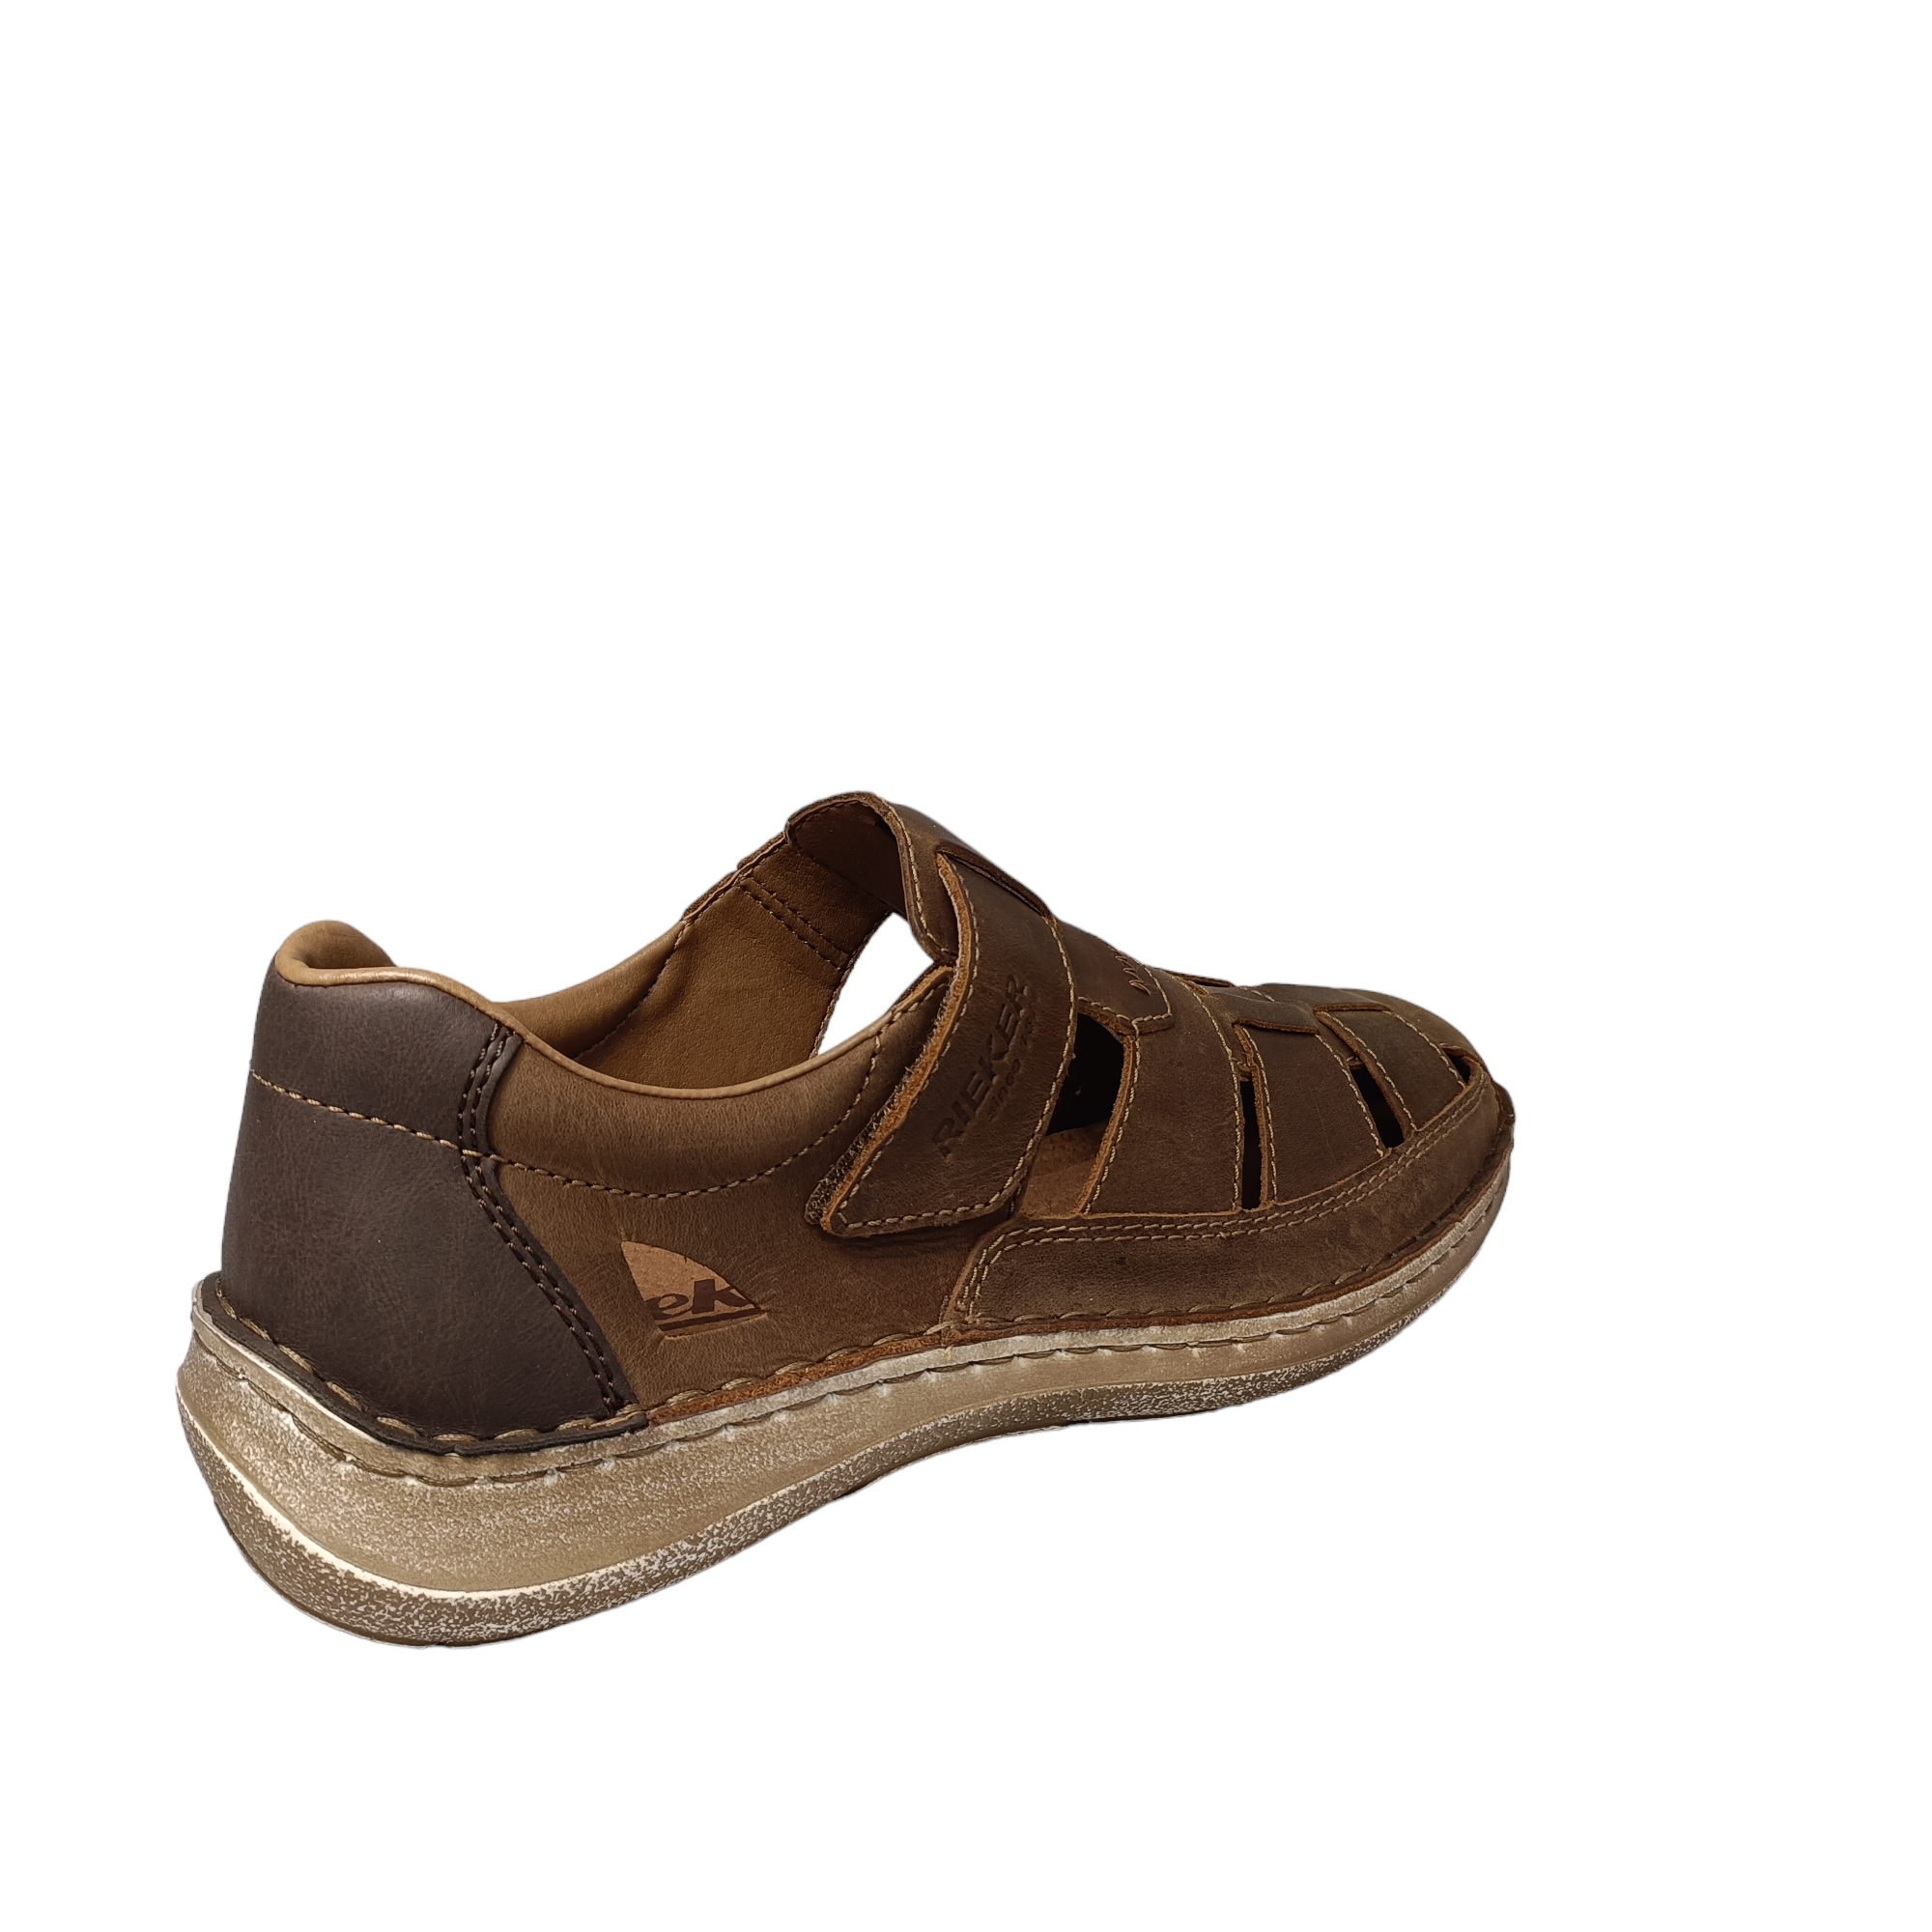 Shop 03078 Mens Rieker - with shoe&amp;me - from Rieker - Shoes - Mens, Shoe, Summer - [collection]